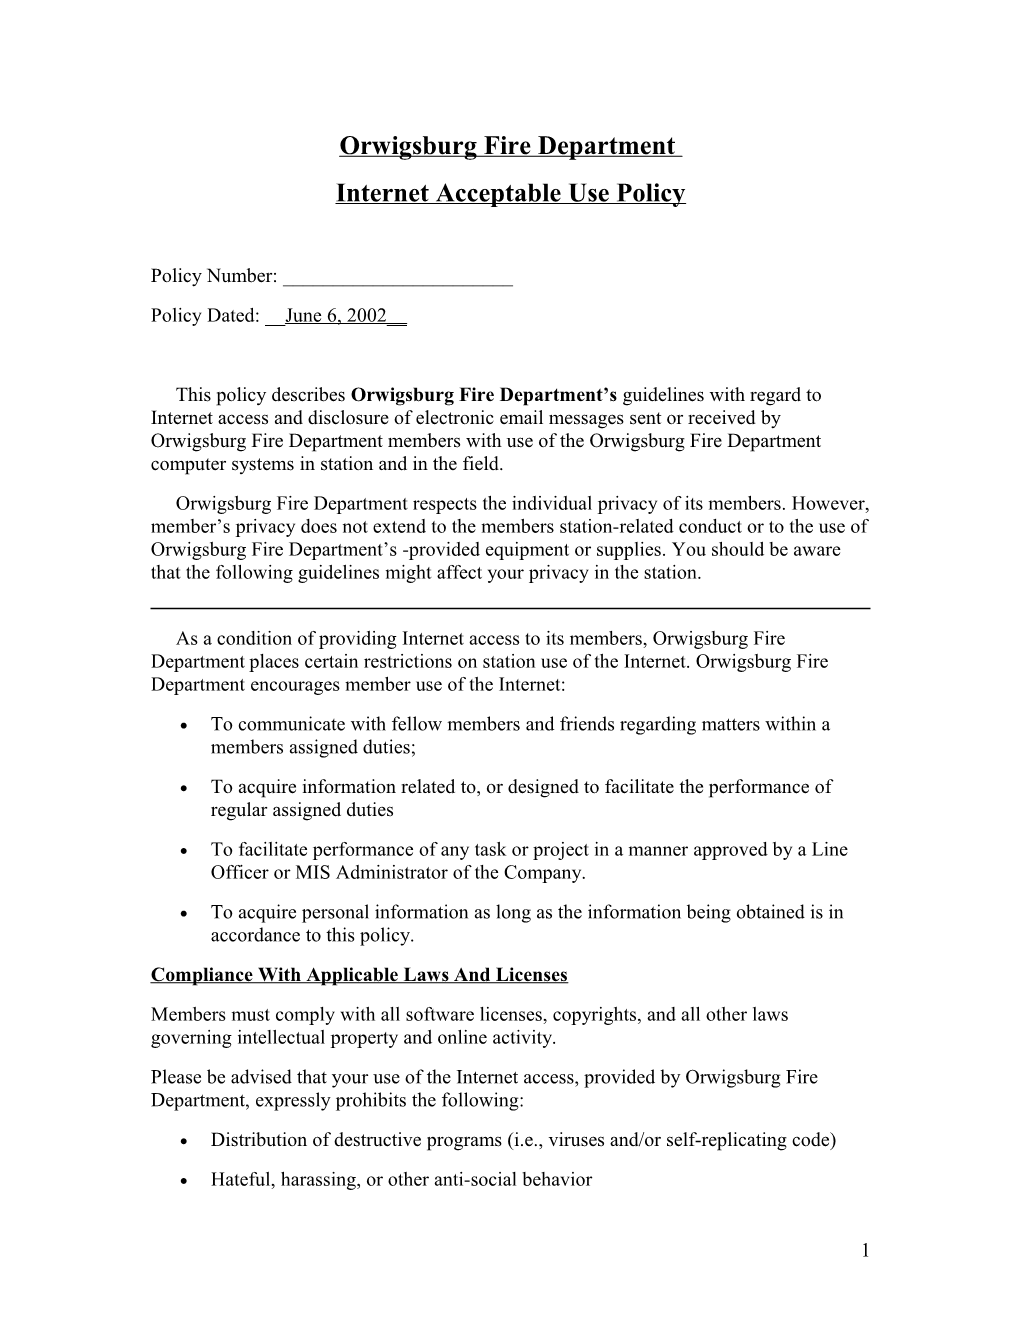 Internet Acceptable Use Policy